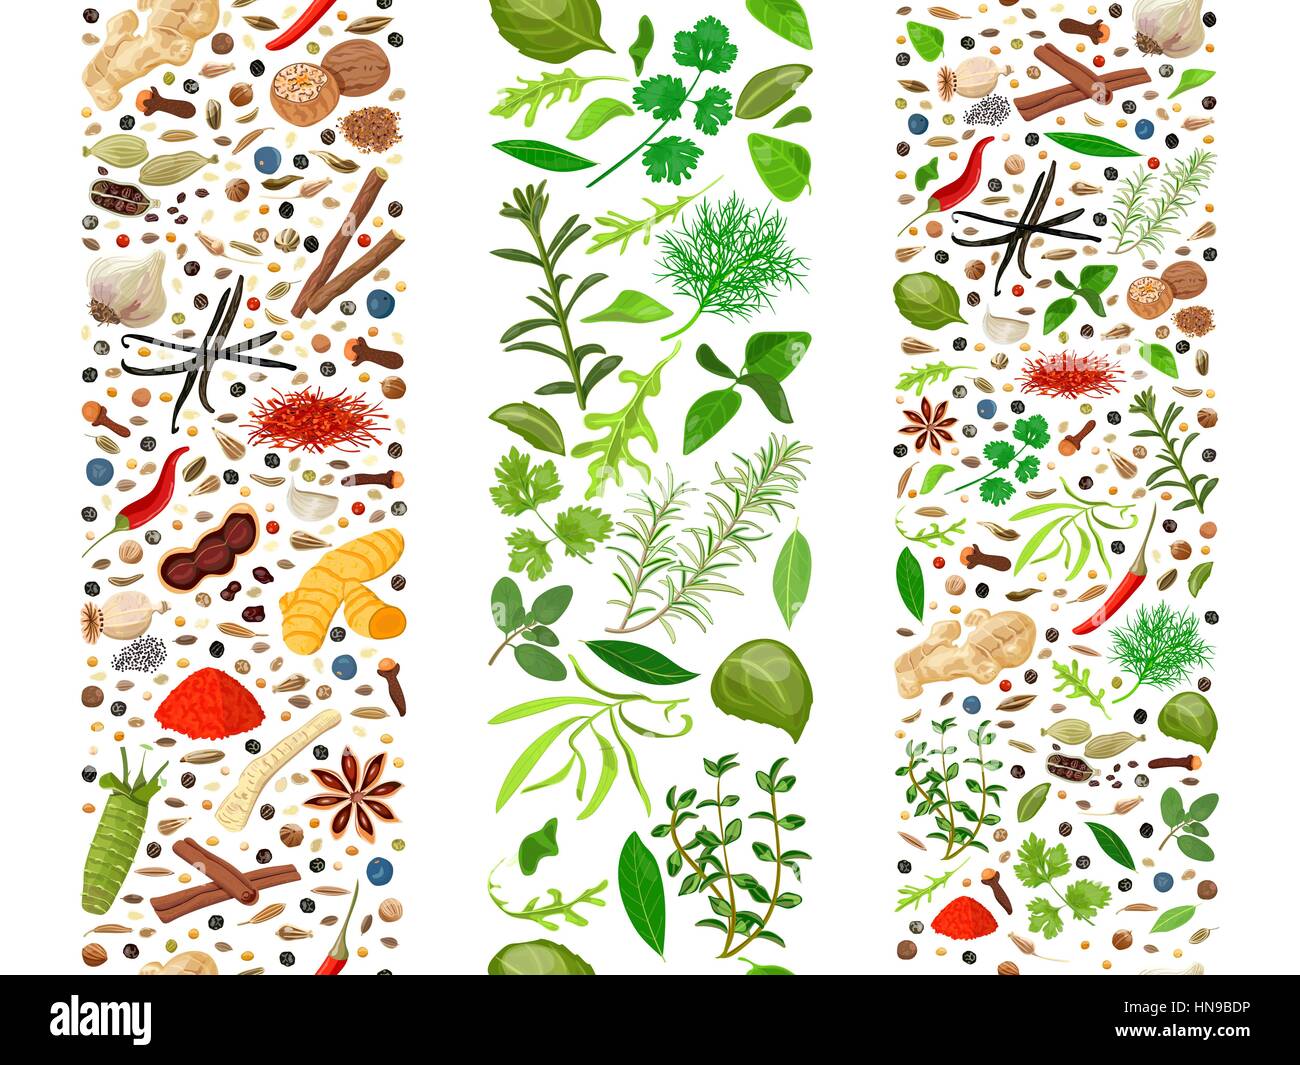 Popular culinary herbs and spices set organized in three ribbons. Cooking seasonings poster. Design for decoration, cosmetics, store, health care prod Stock Vector